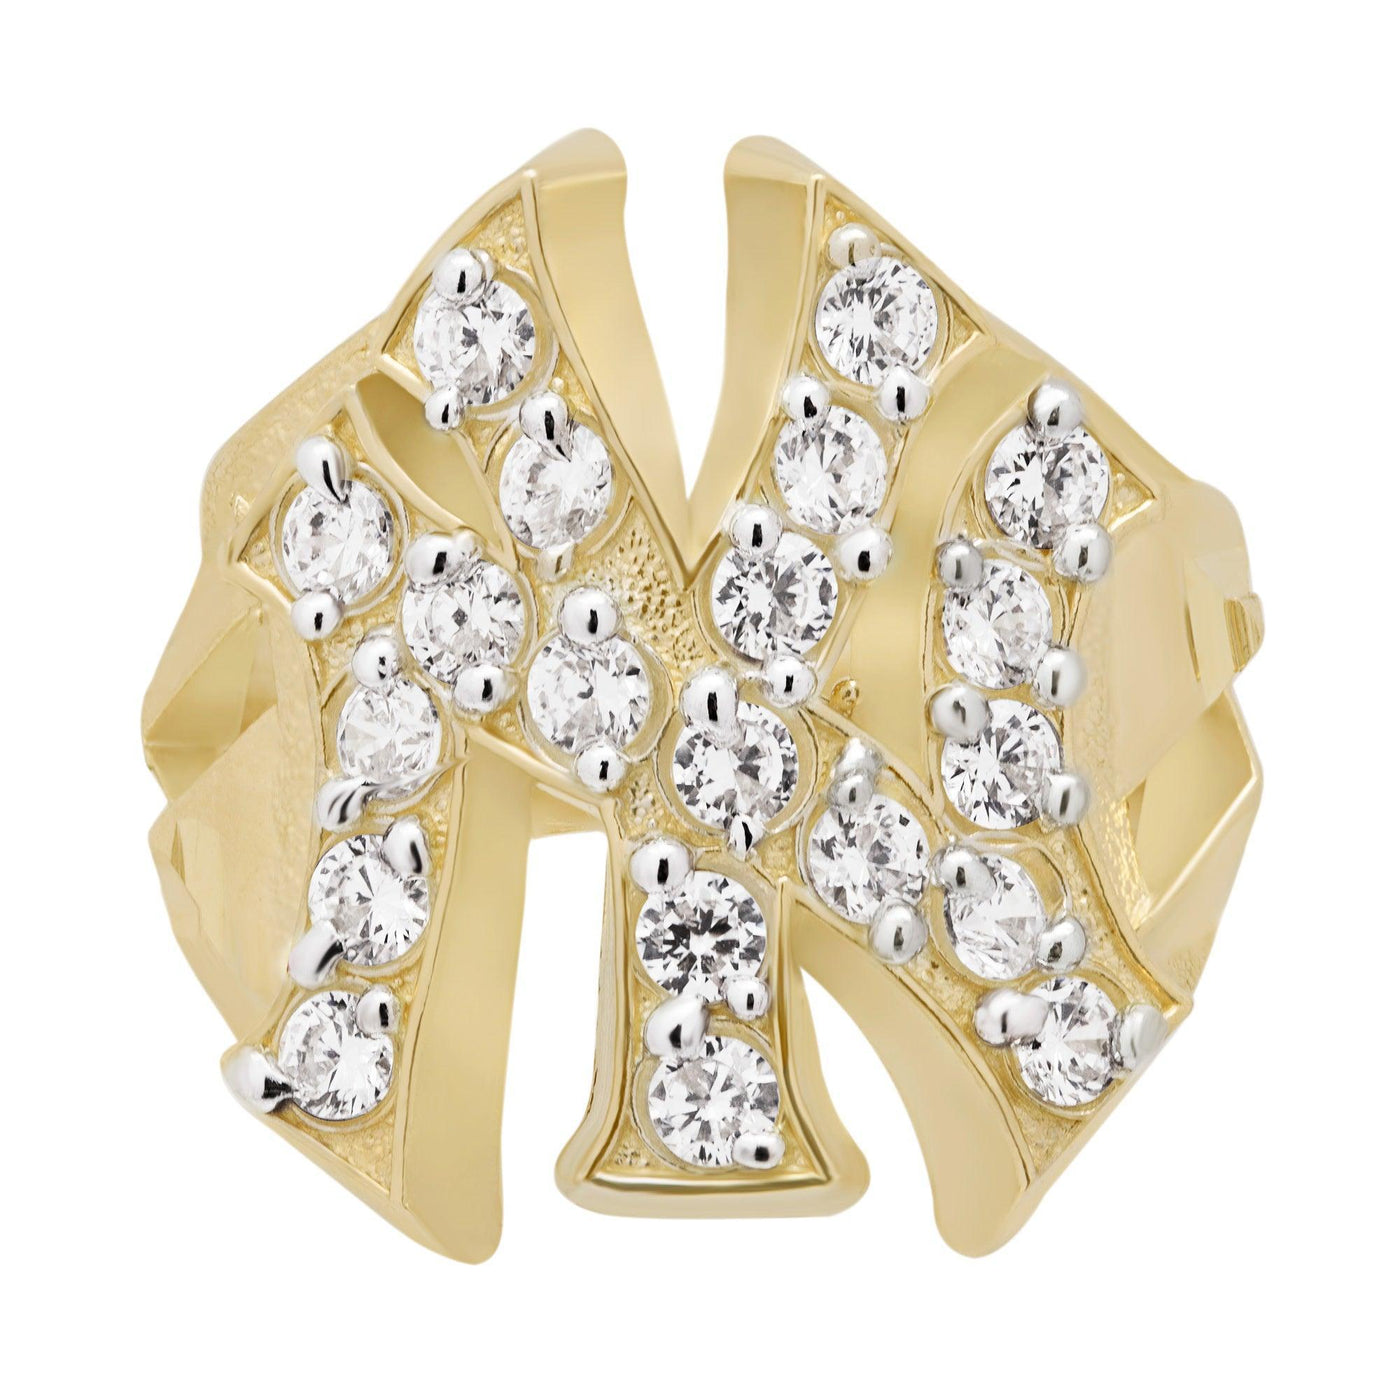 New York Yankees CZ Ring Solid 10K Yellow Gold - bayamjewelry